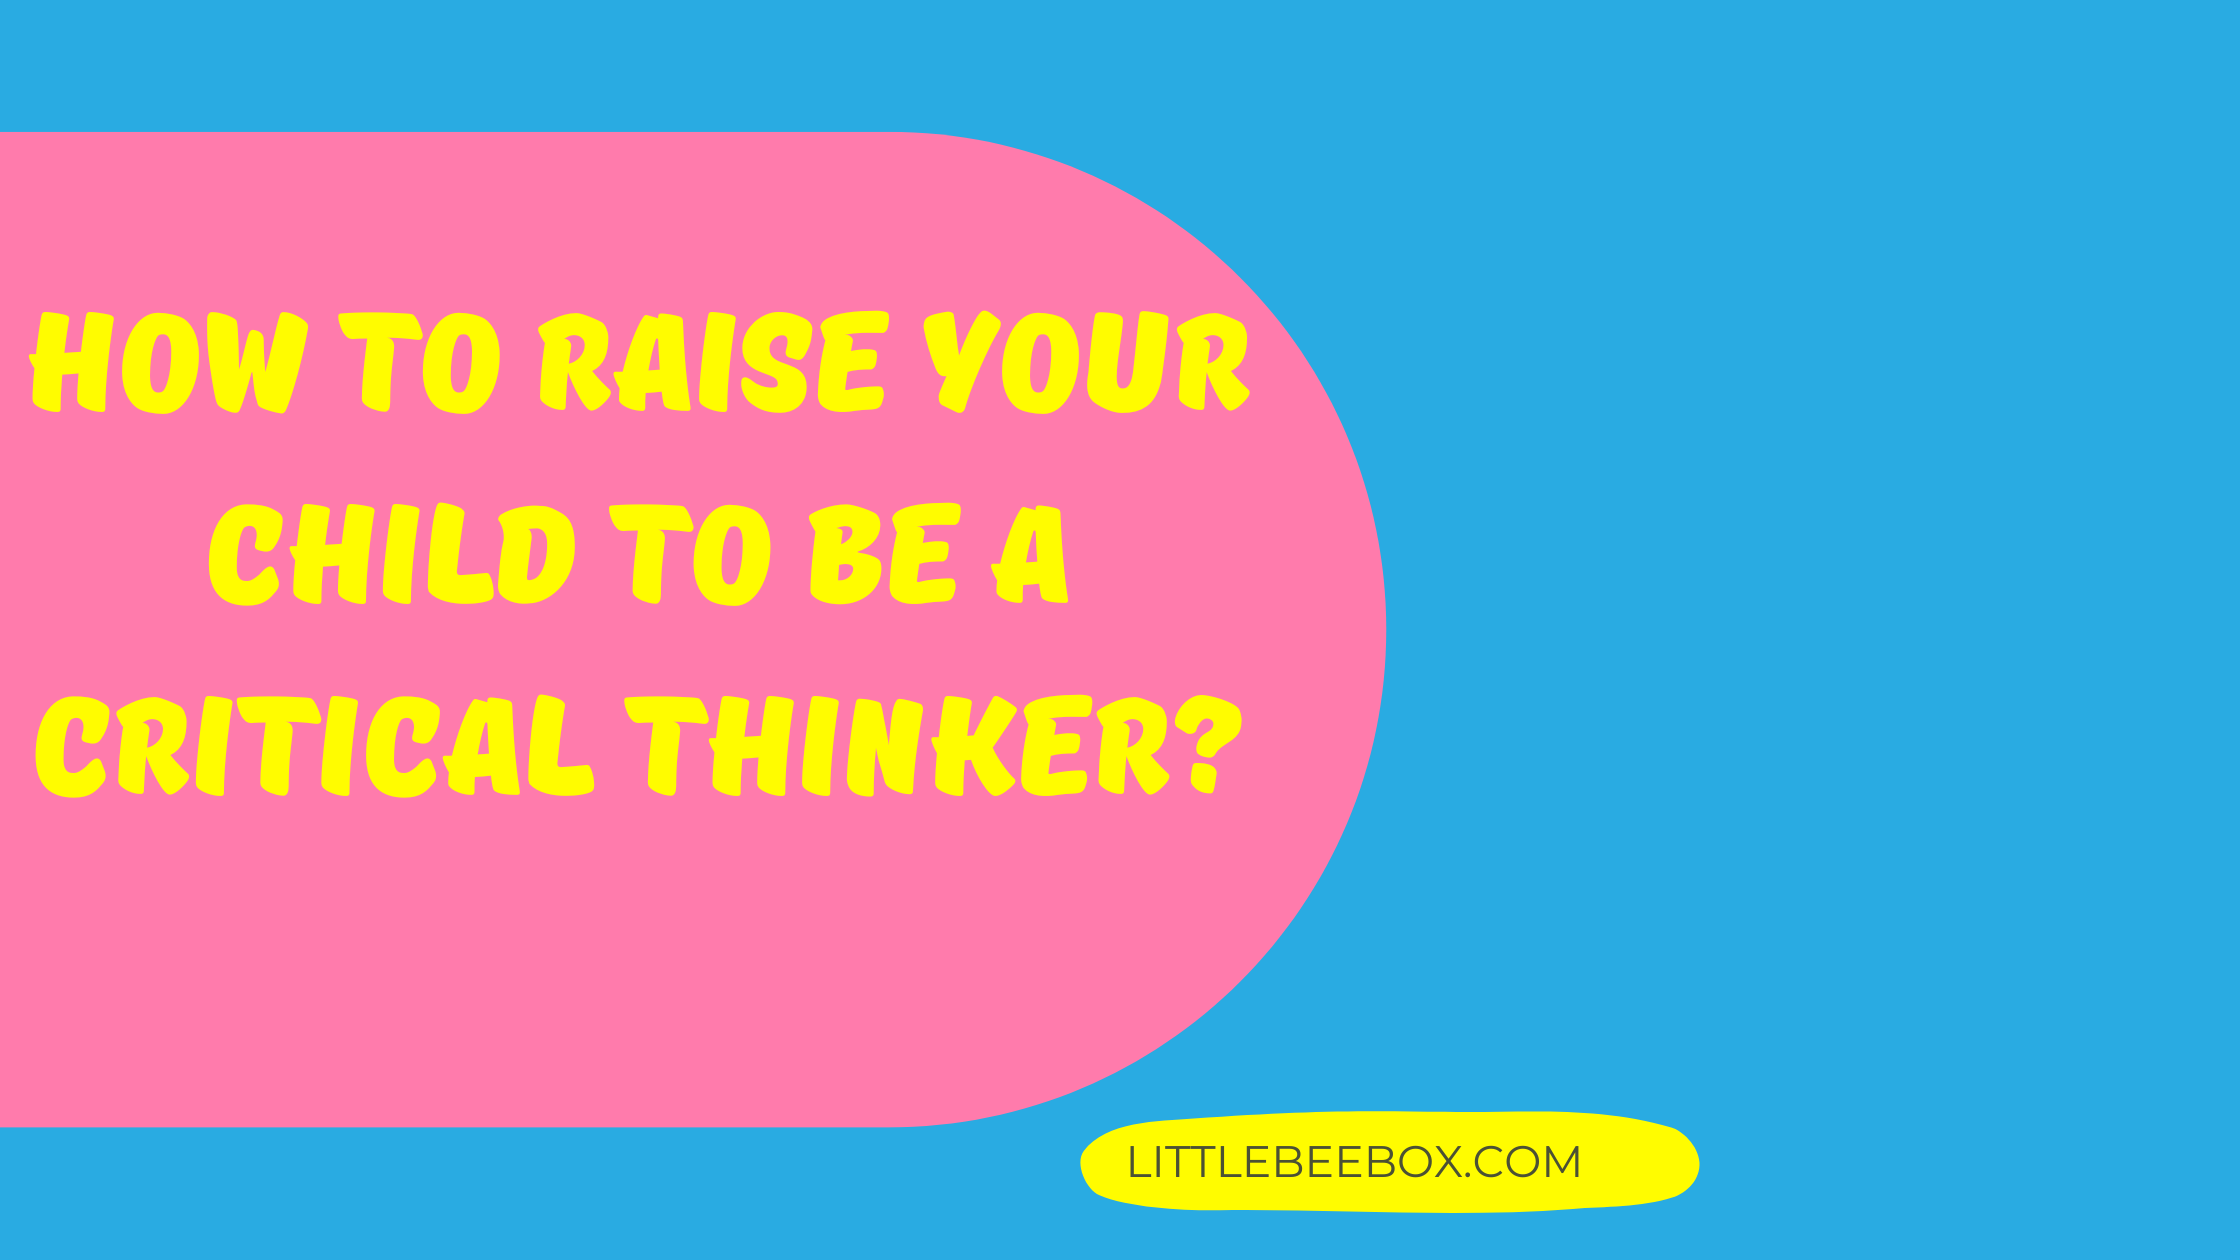 How to raise your child to be a critical thinker?